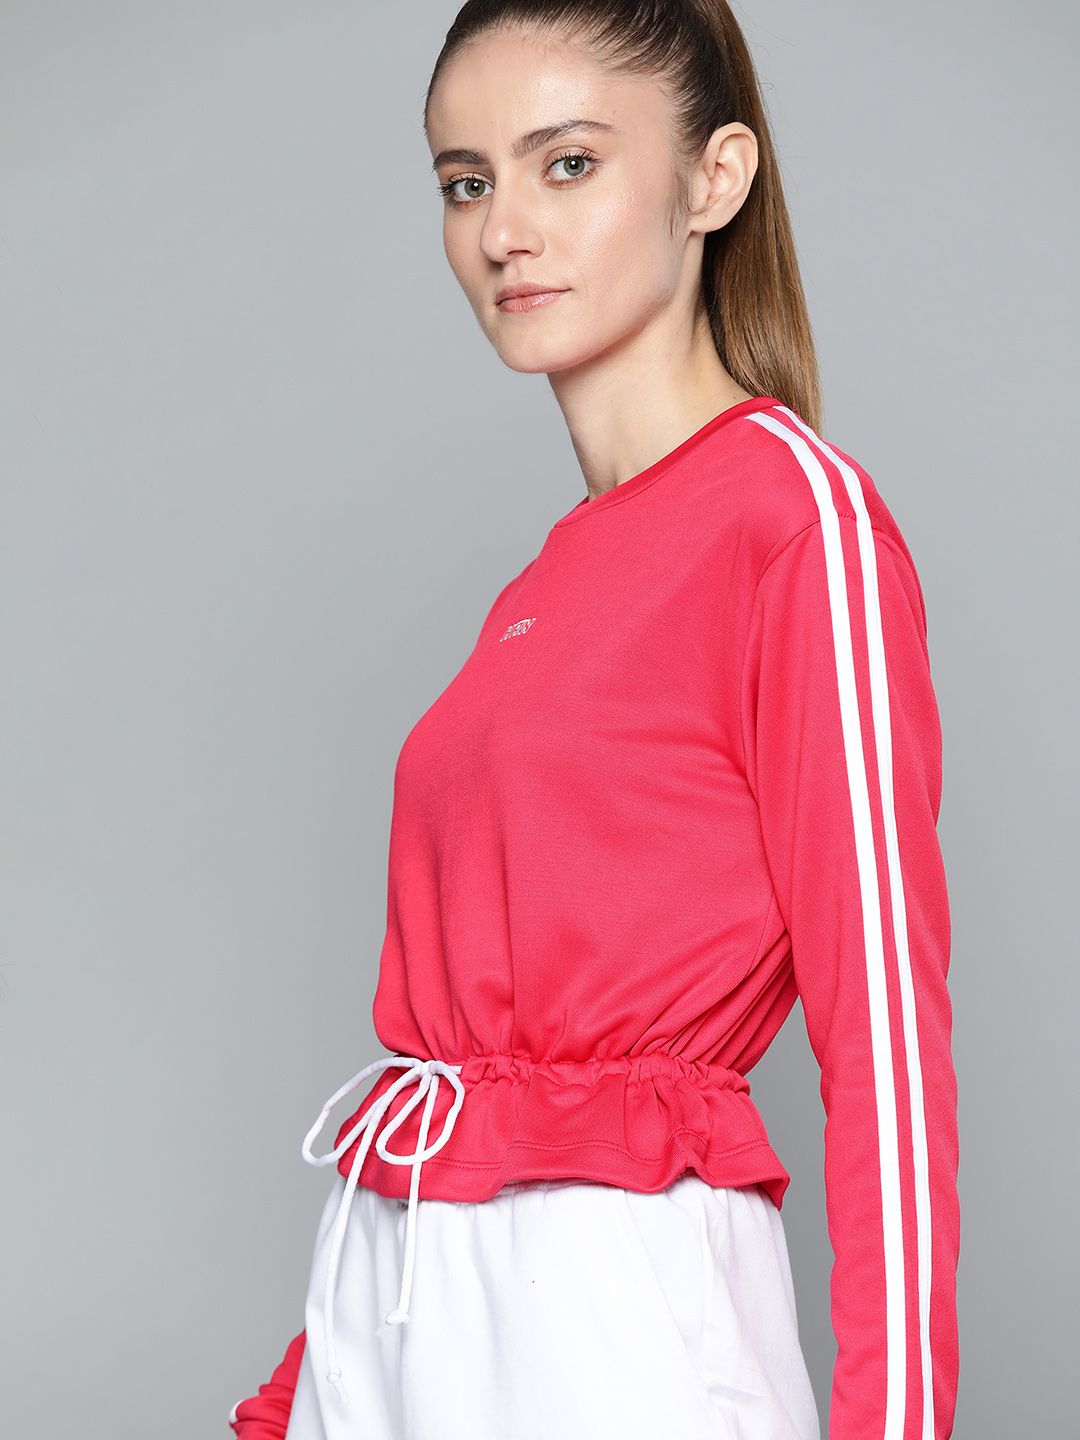 HRX By Hrithik Roshan Lifestyle Women Hot House Pink Rapid-Dry Solid Sweatshirts Price in India